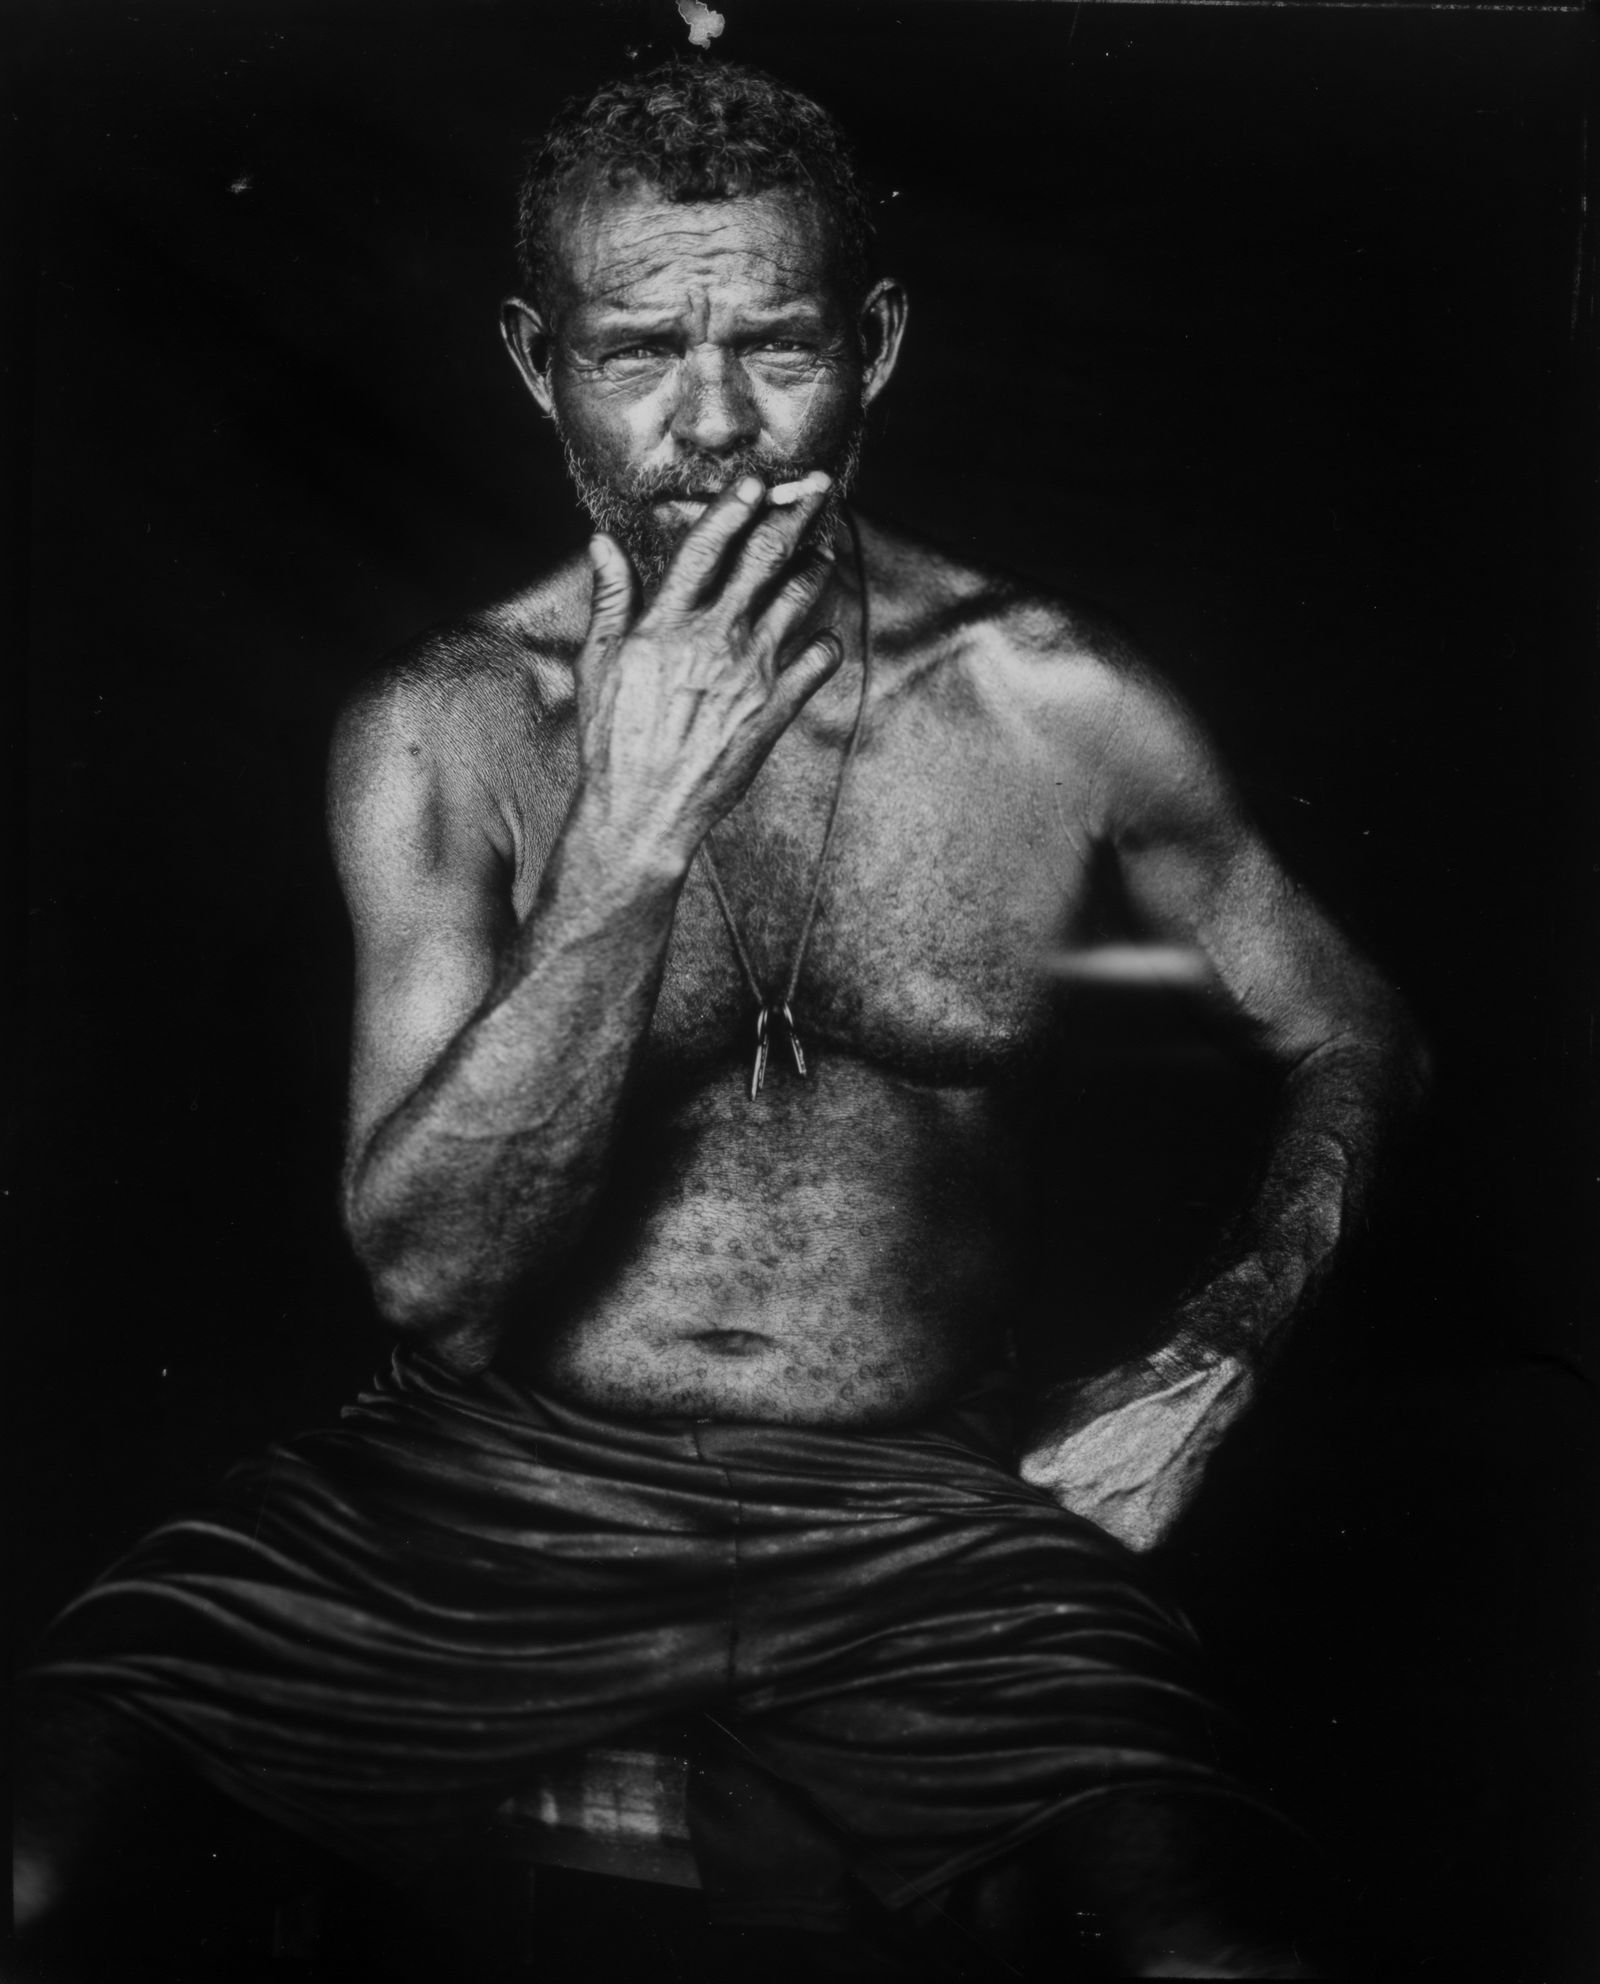 © RODRIGO ABD - Image from the FISHERMAN´S OIL photography project